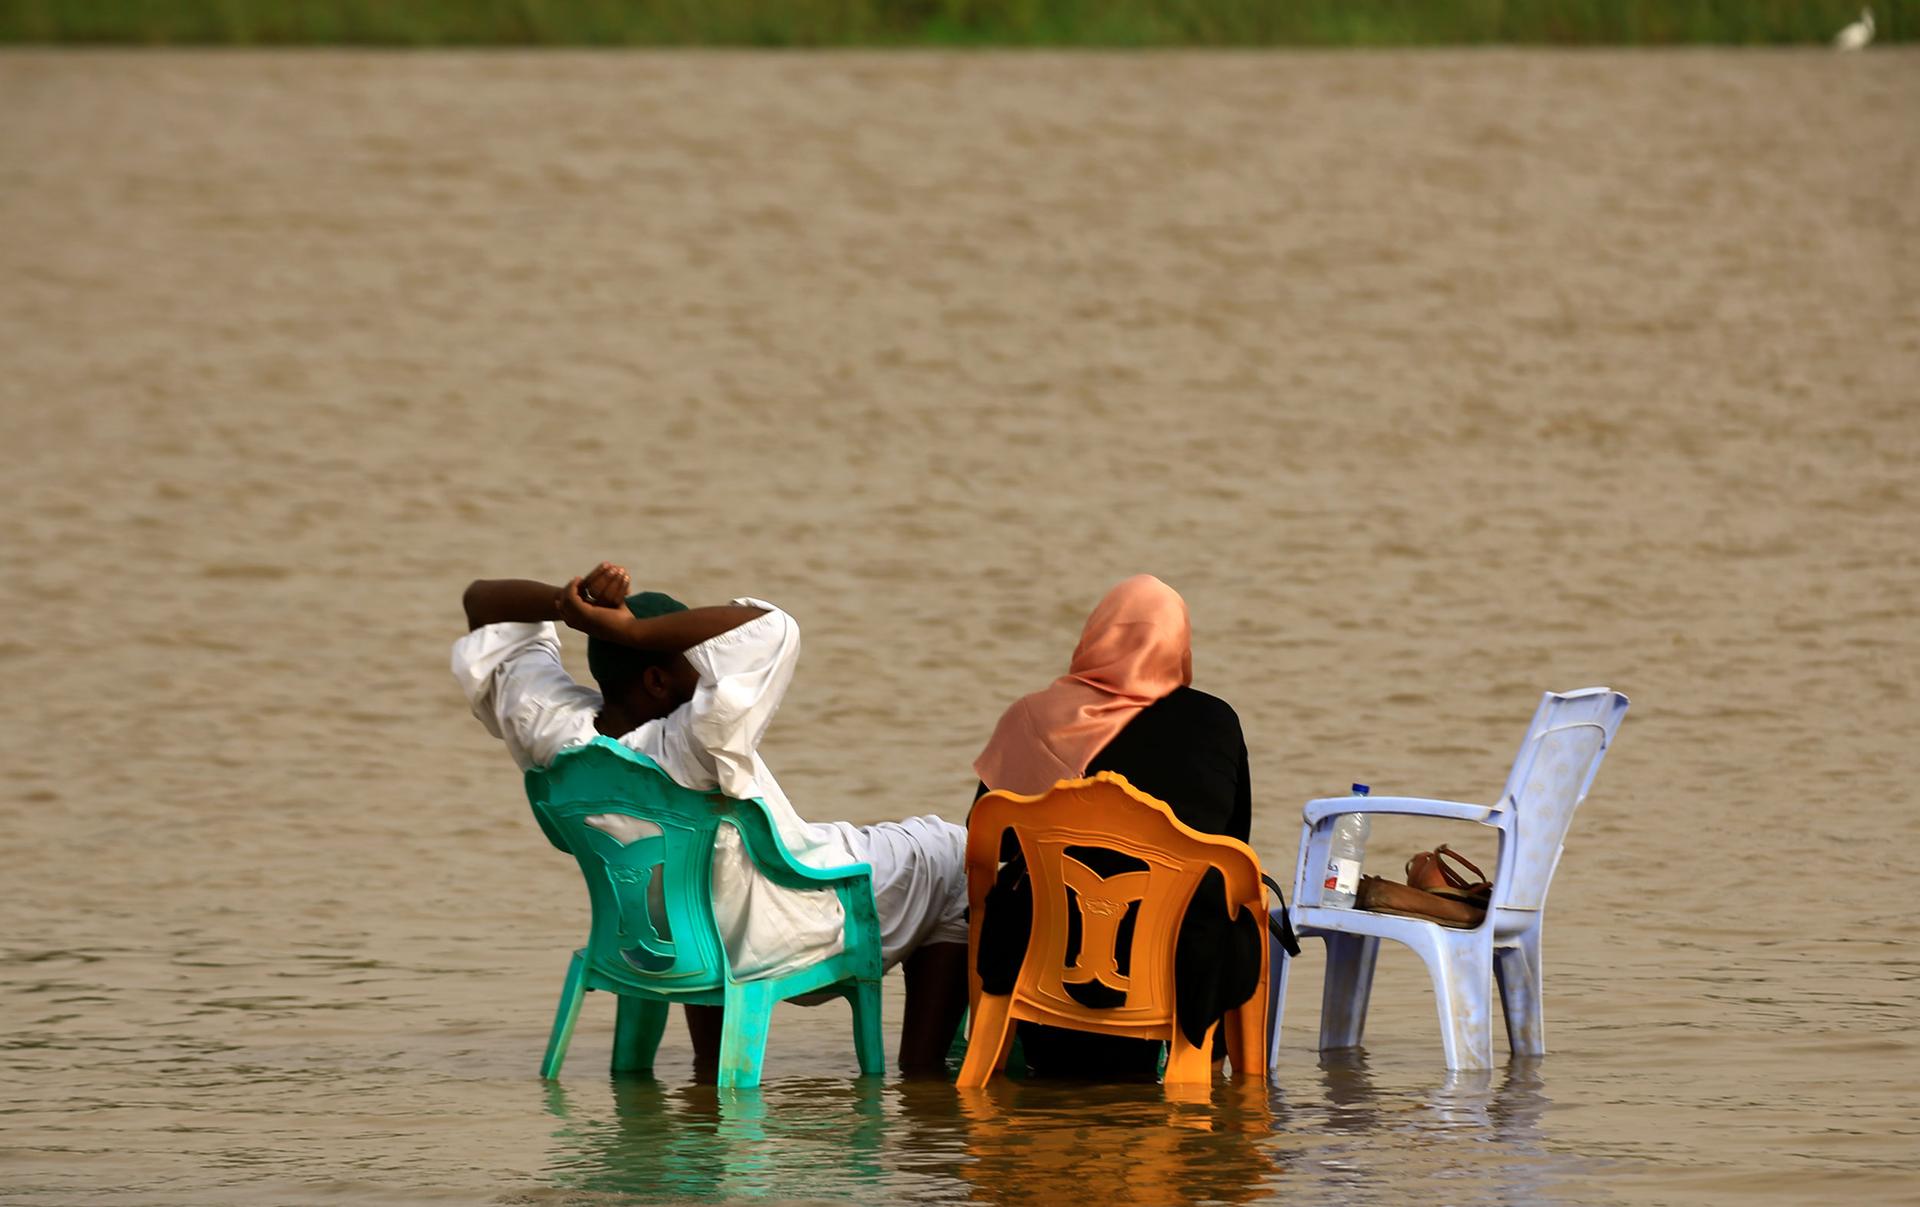 A man and woman are shown from behind both sitting in plastic chairs submerged in the water to their ankles.